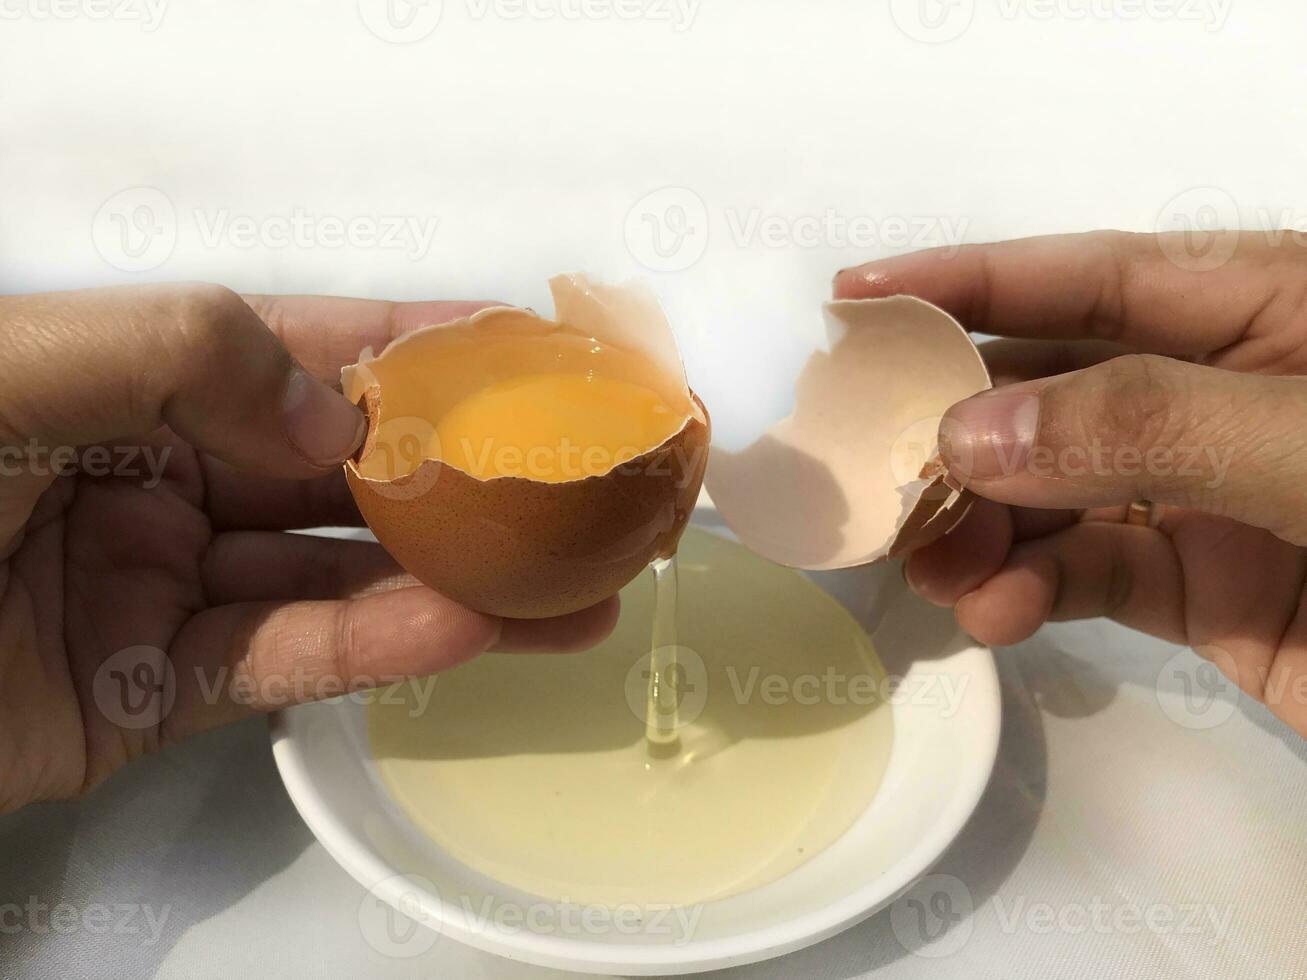 A woman's hand cracks an egg to separate the egg white and yolk and the egg shell in the background. photo